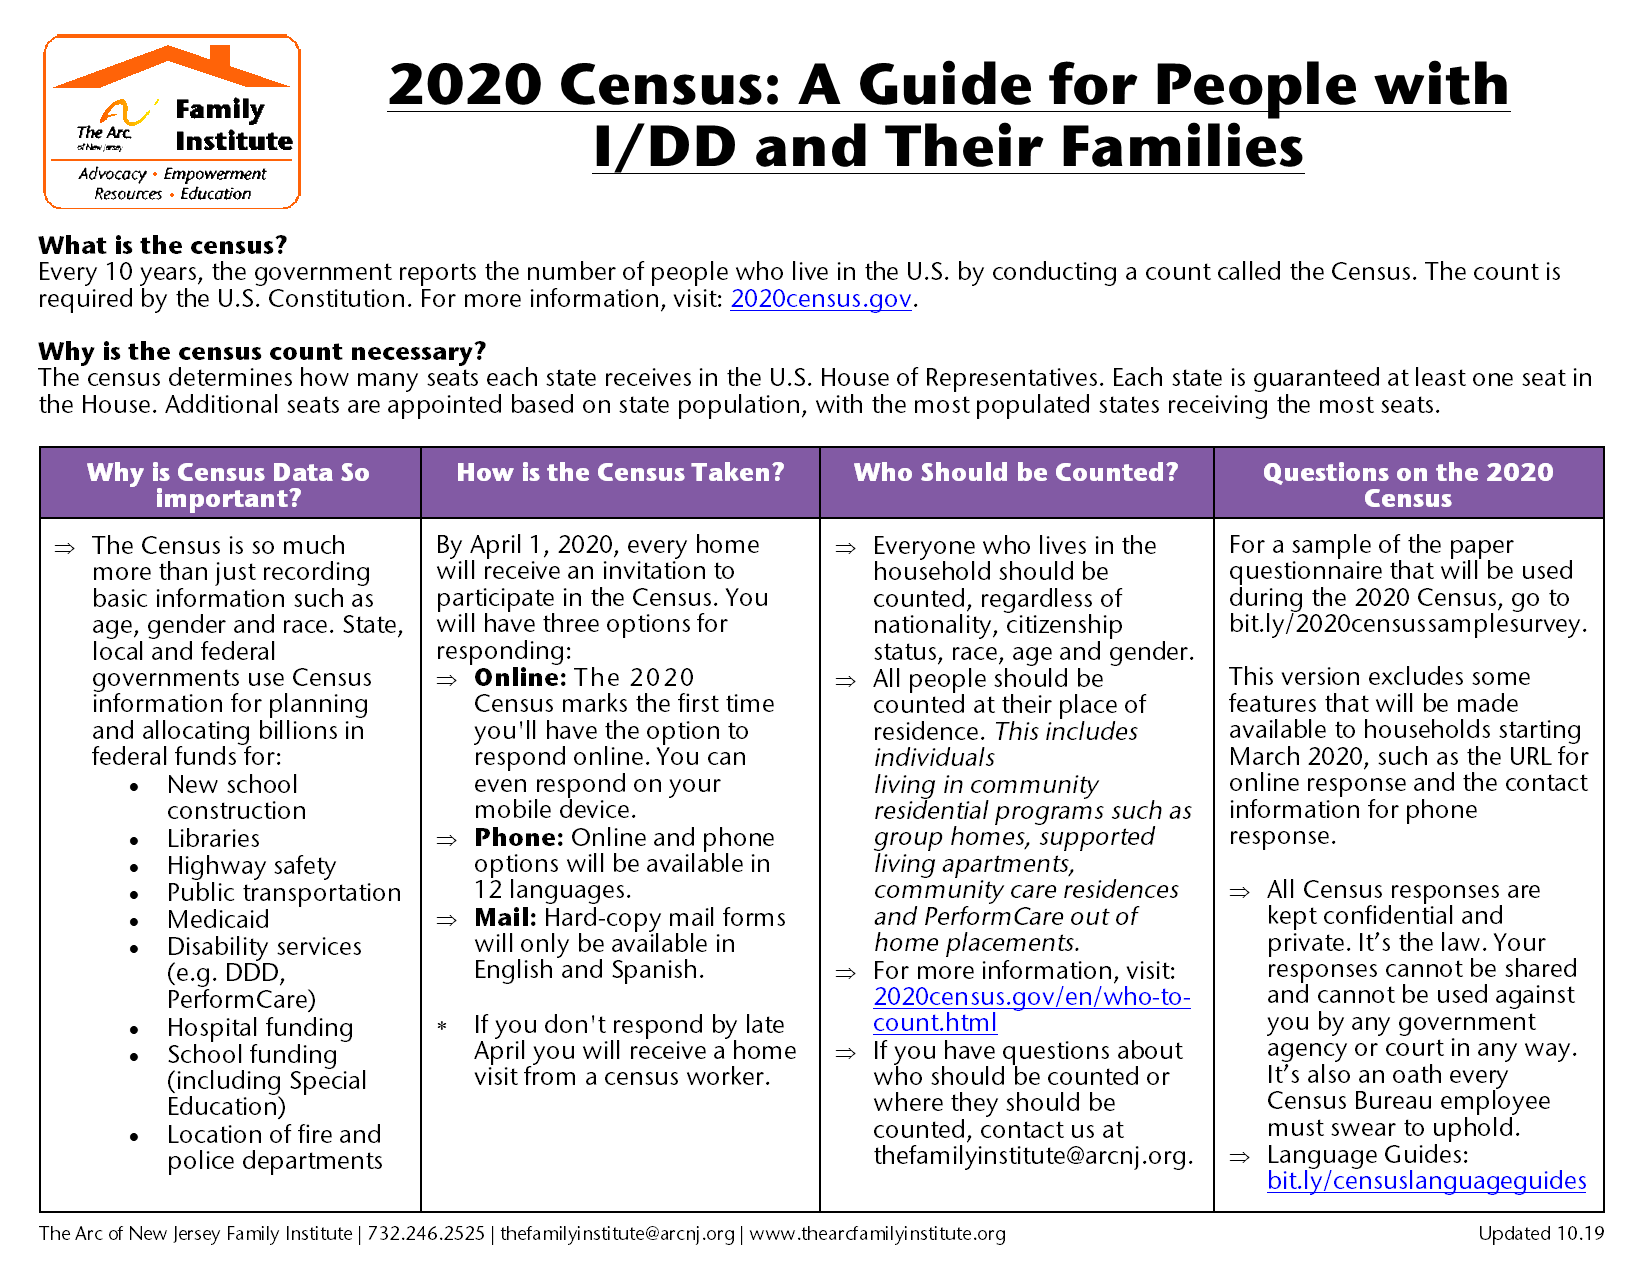 2020 Census: A Guide for People with Intellectual and Developmental Disabilities and Their Family